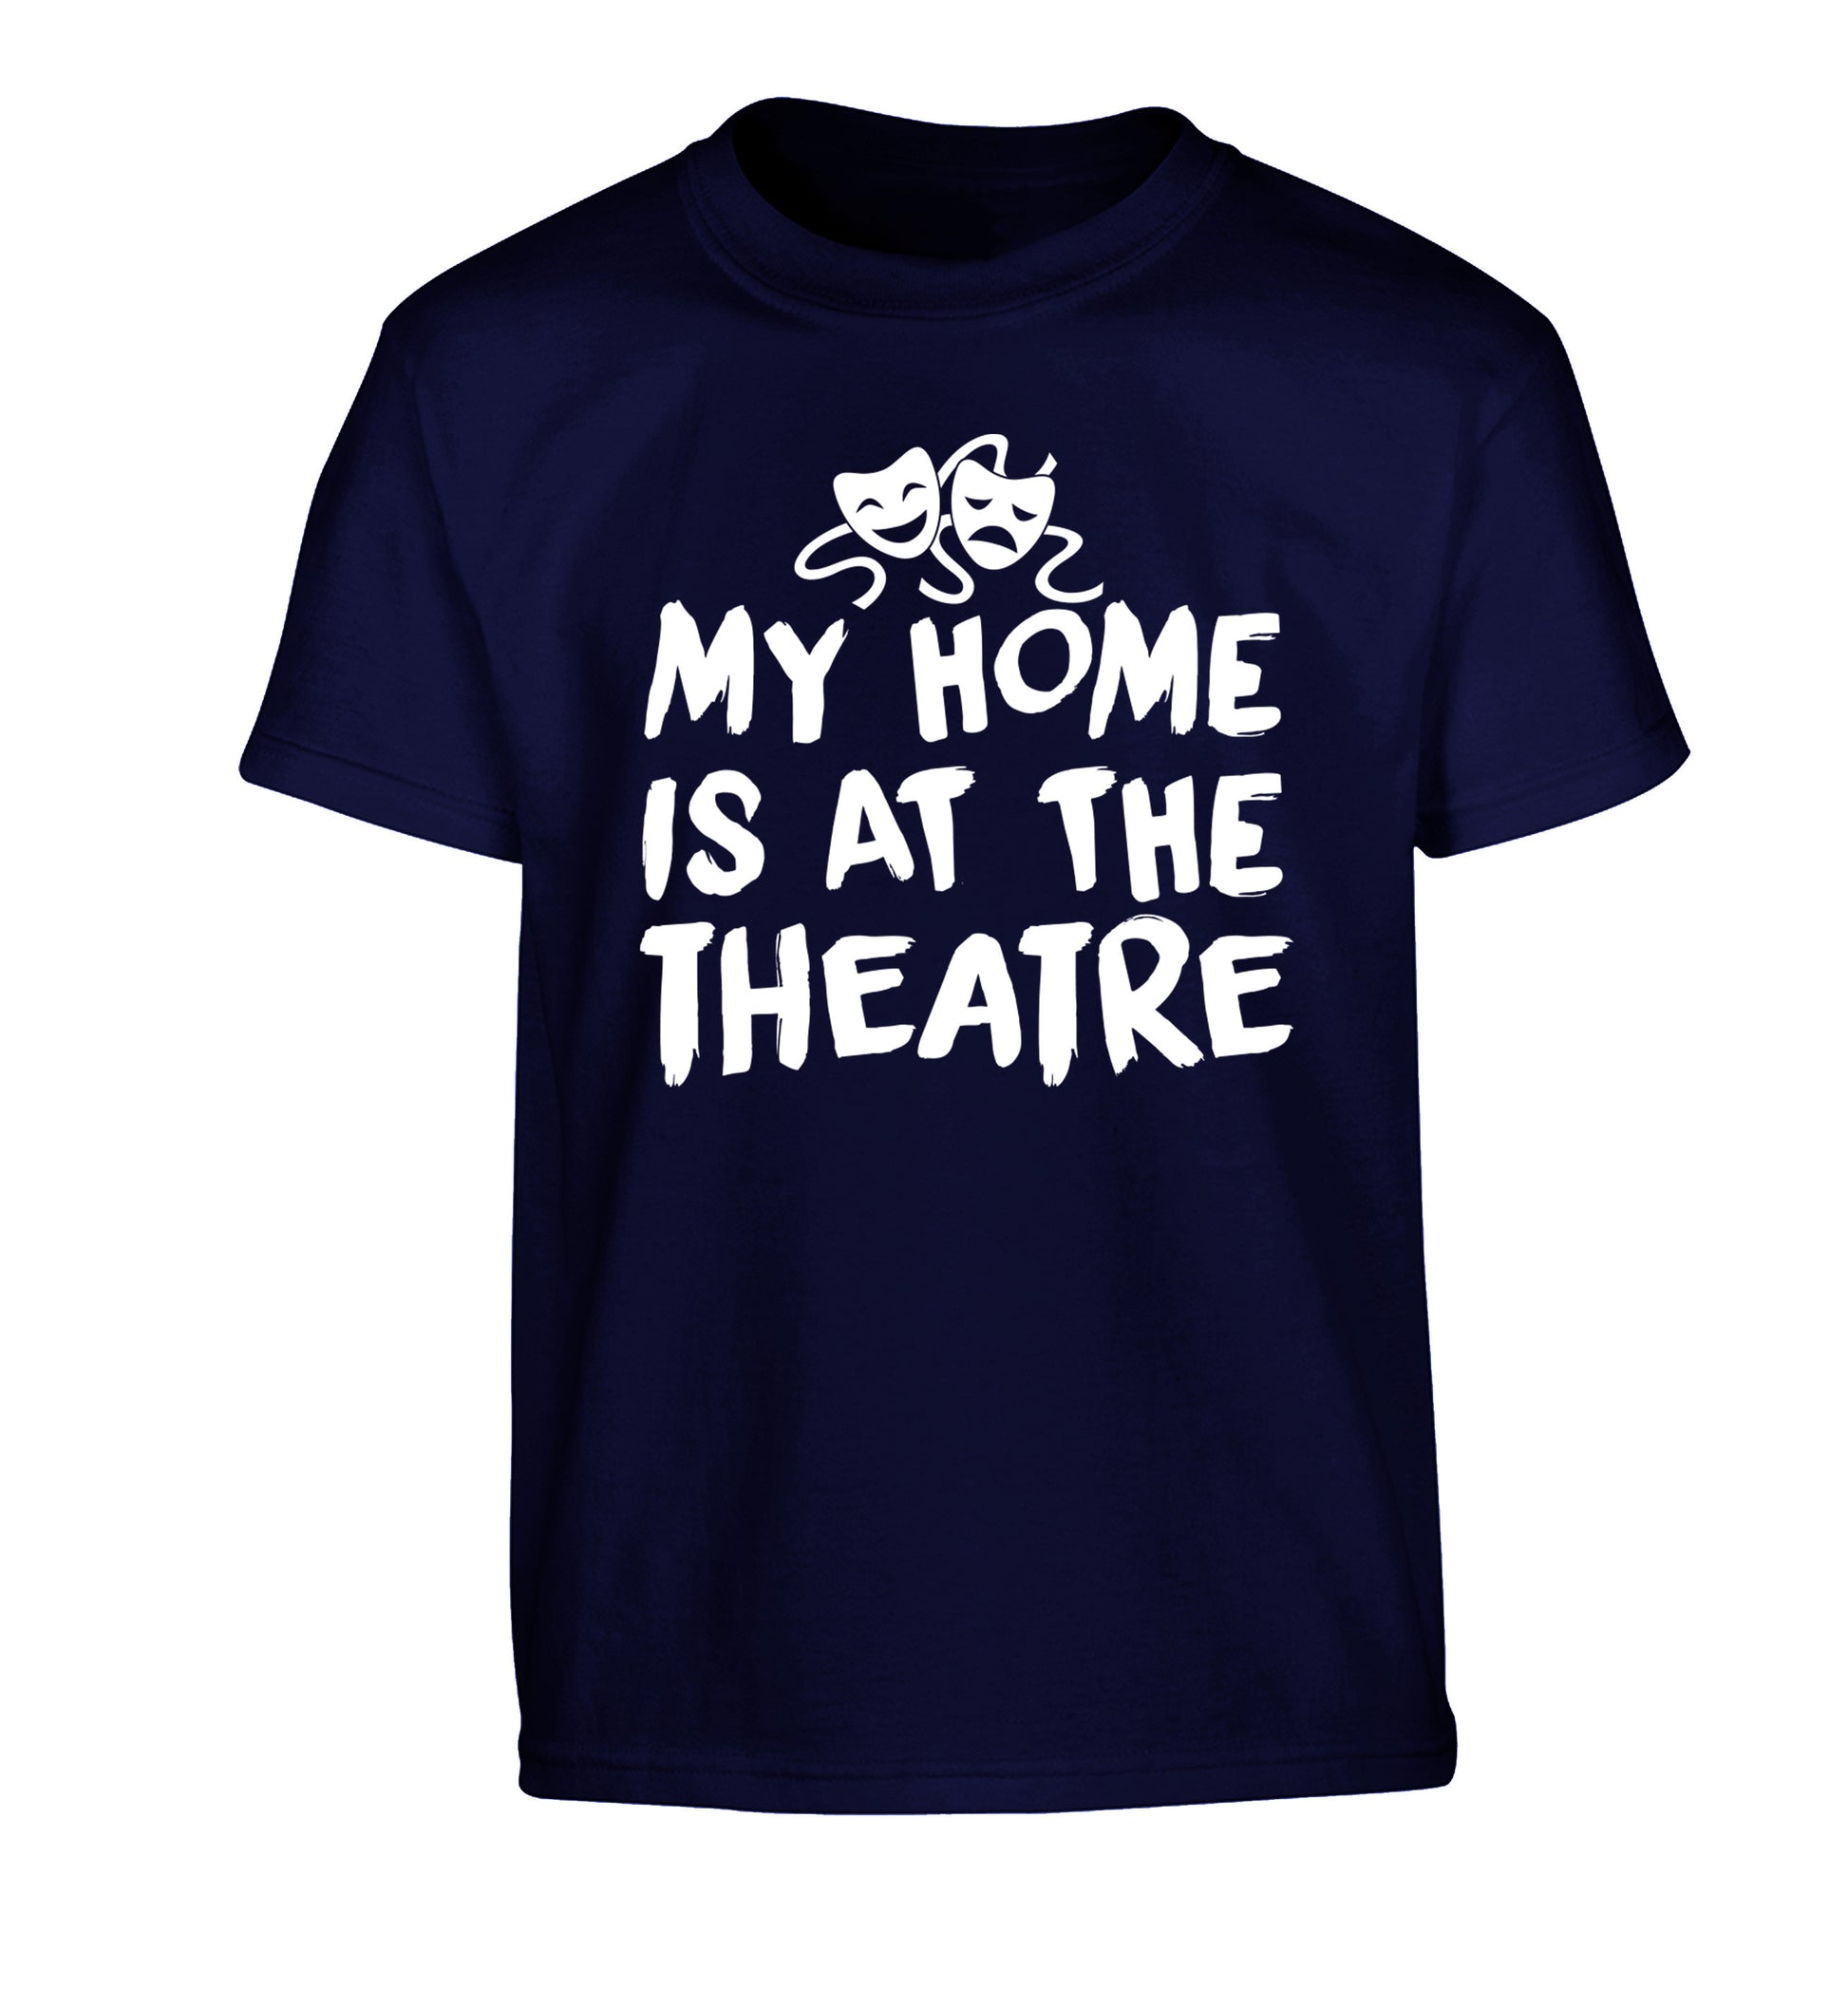 My home is at the theatre Children's navy Tshirt 12-14 Years